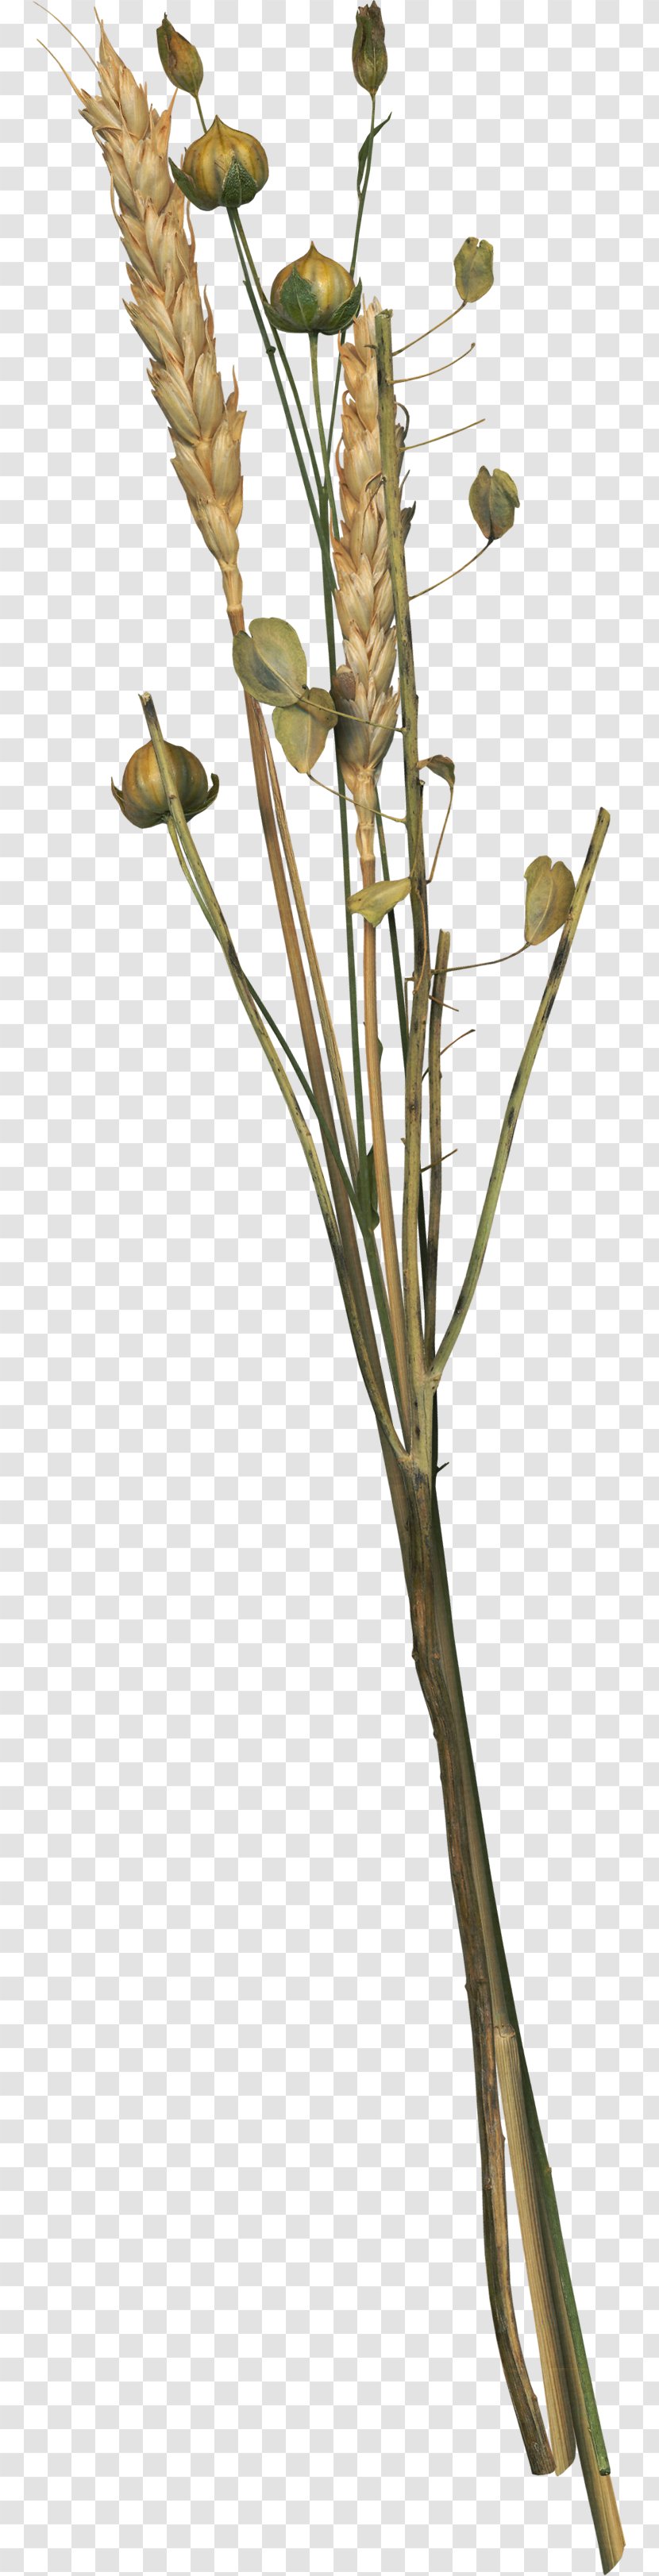 Flower Wheat - Branch - Flowers Transparent PNG